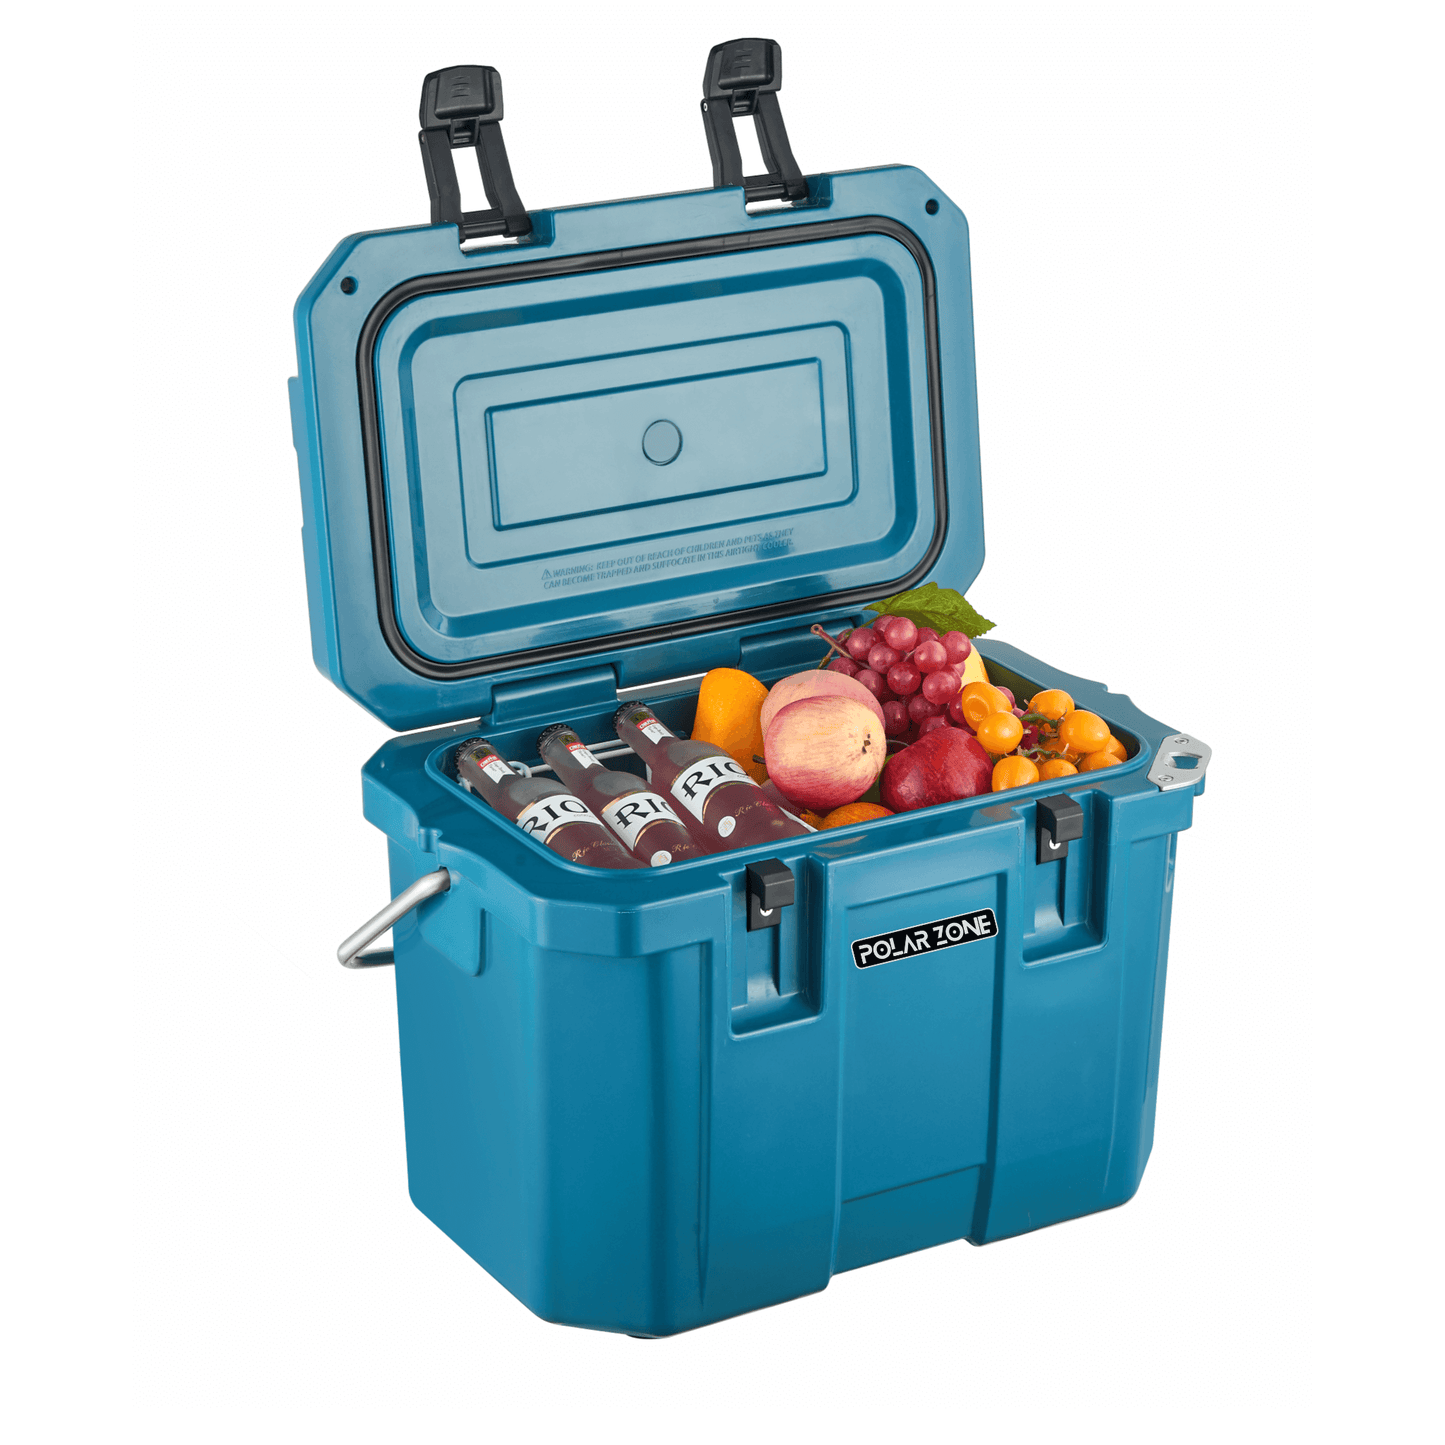 Polar Zone Hard Cooler for Camping, Fishing and Outdoor-Advent 25 Cooler Box